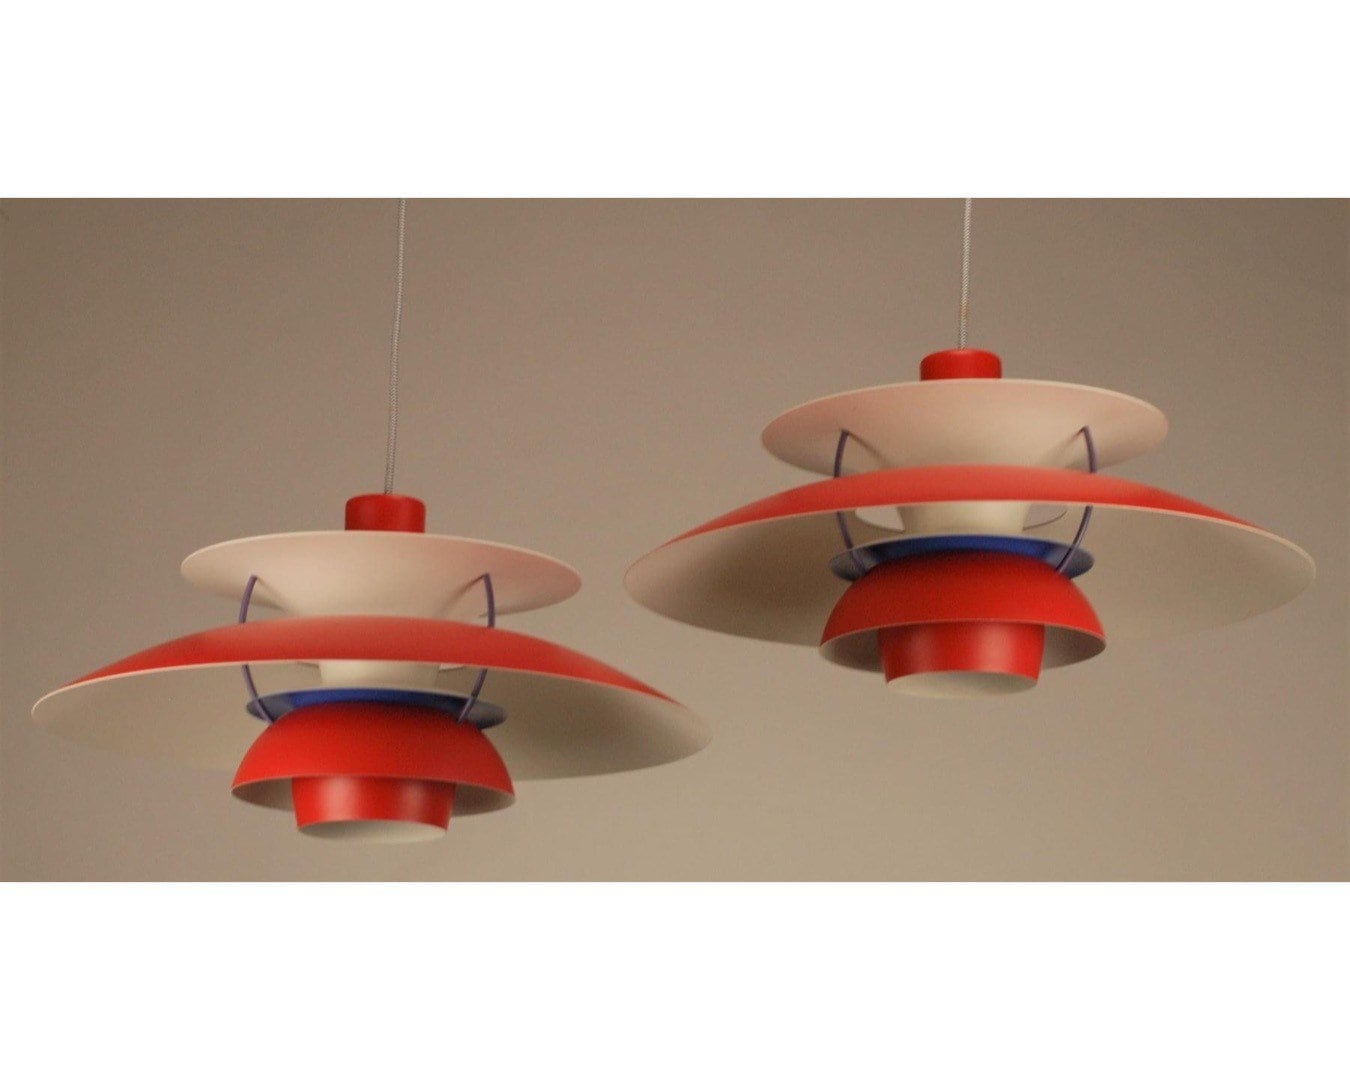 2 Red Louis Poulsen pendant lights | blue anti glare rings and purple spacers | Customize Your Vintage PH5 Lamp! - FancyVintage.nl -